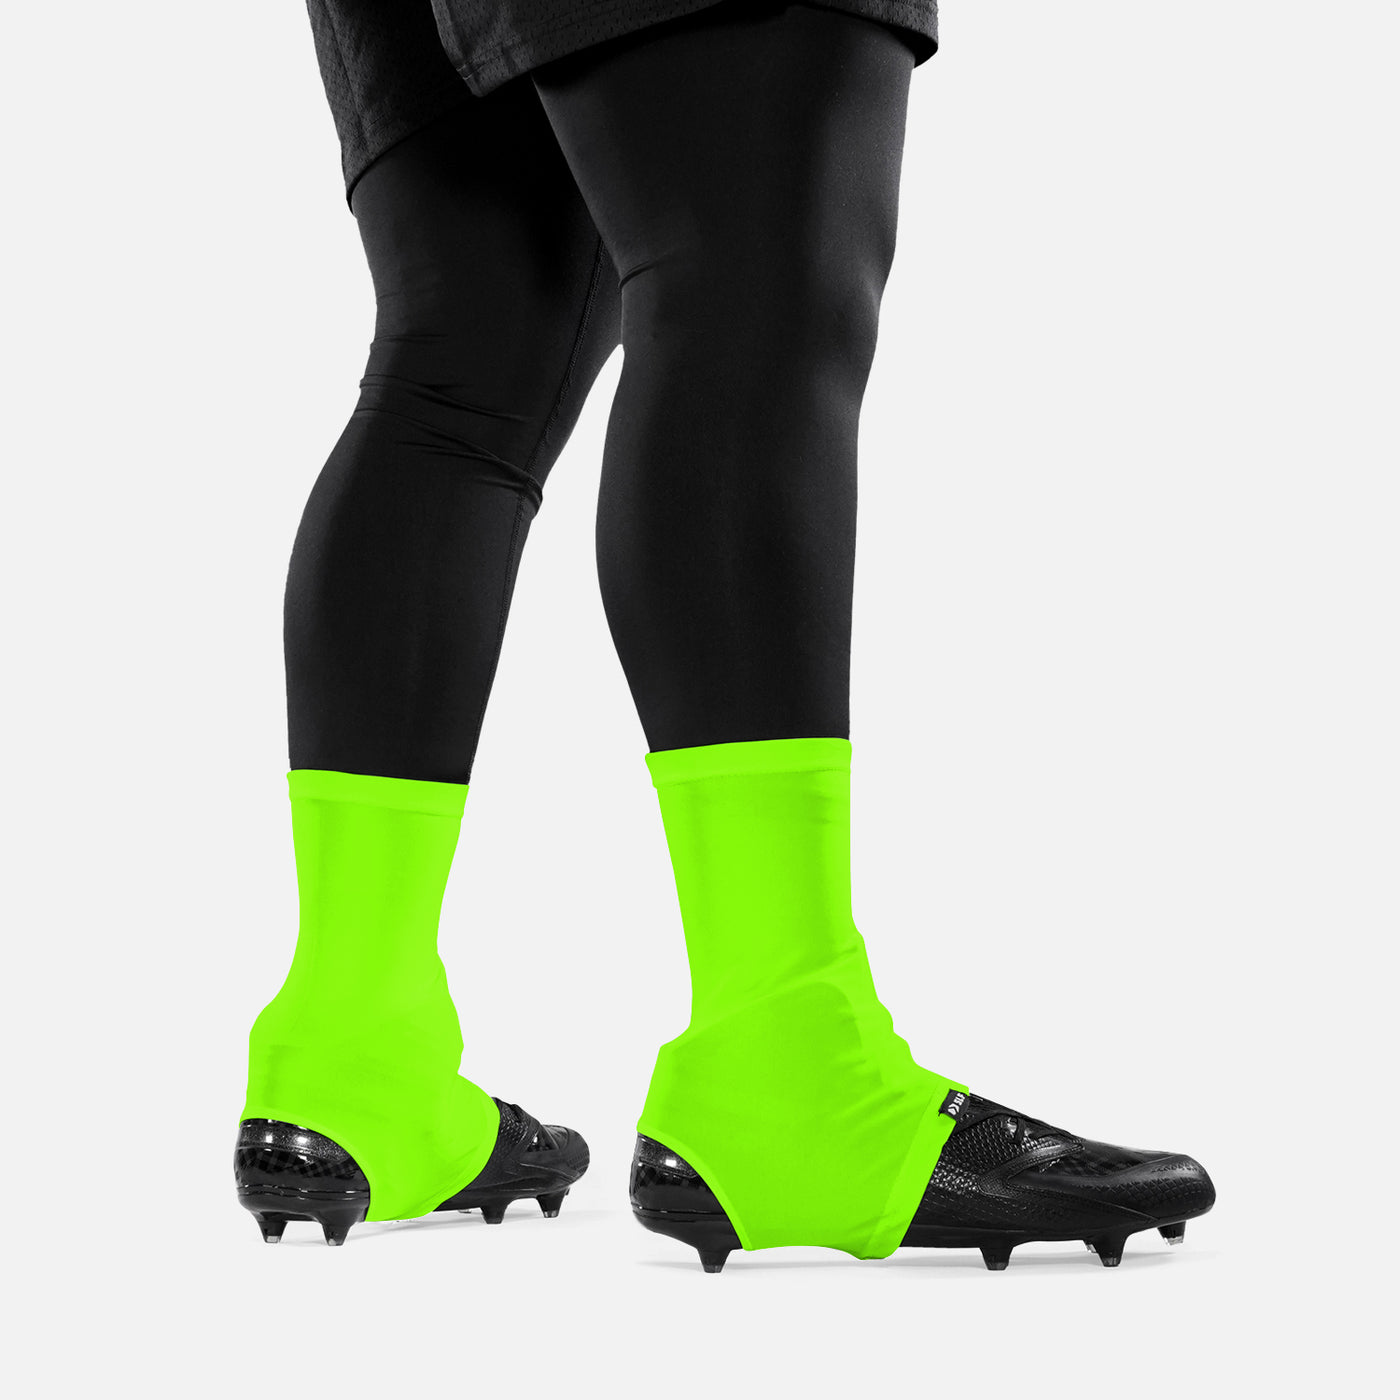 Hot Green Spats / Cleat Covers - Big